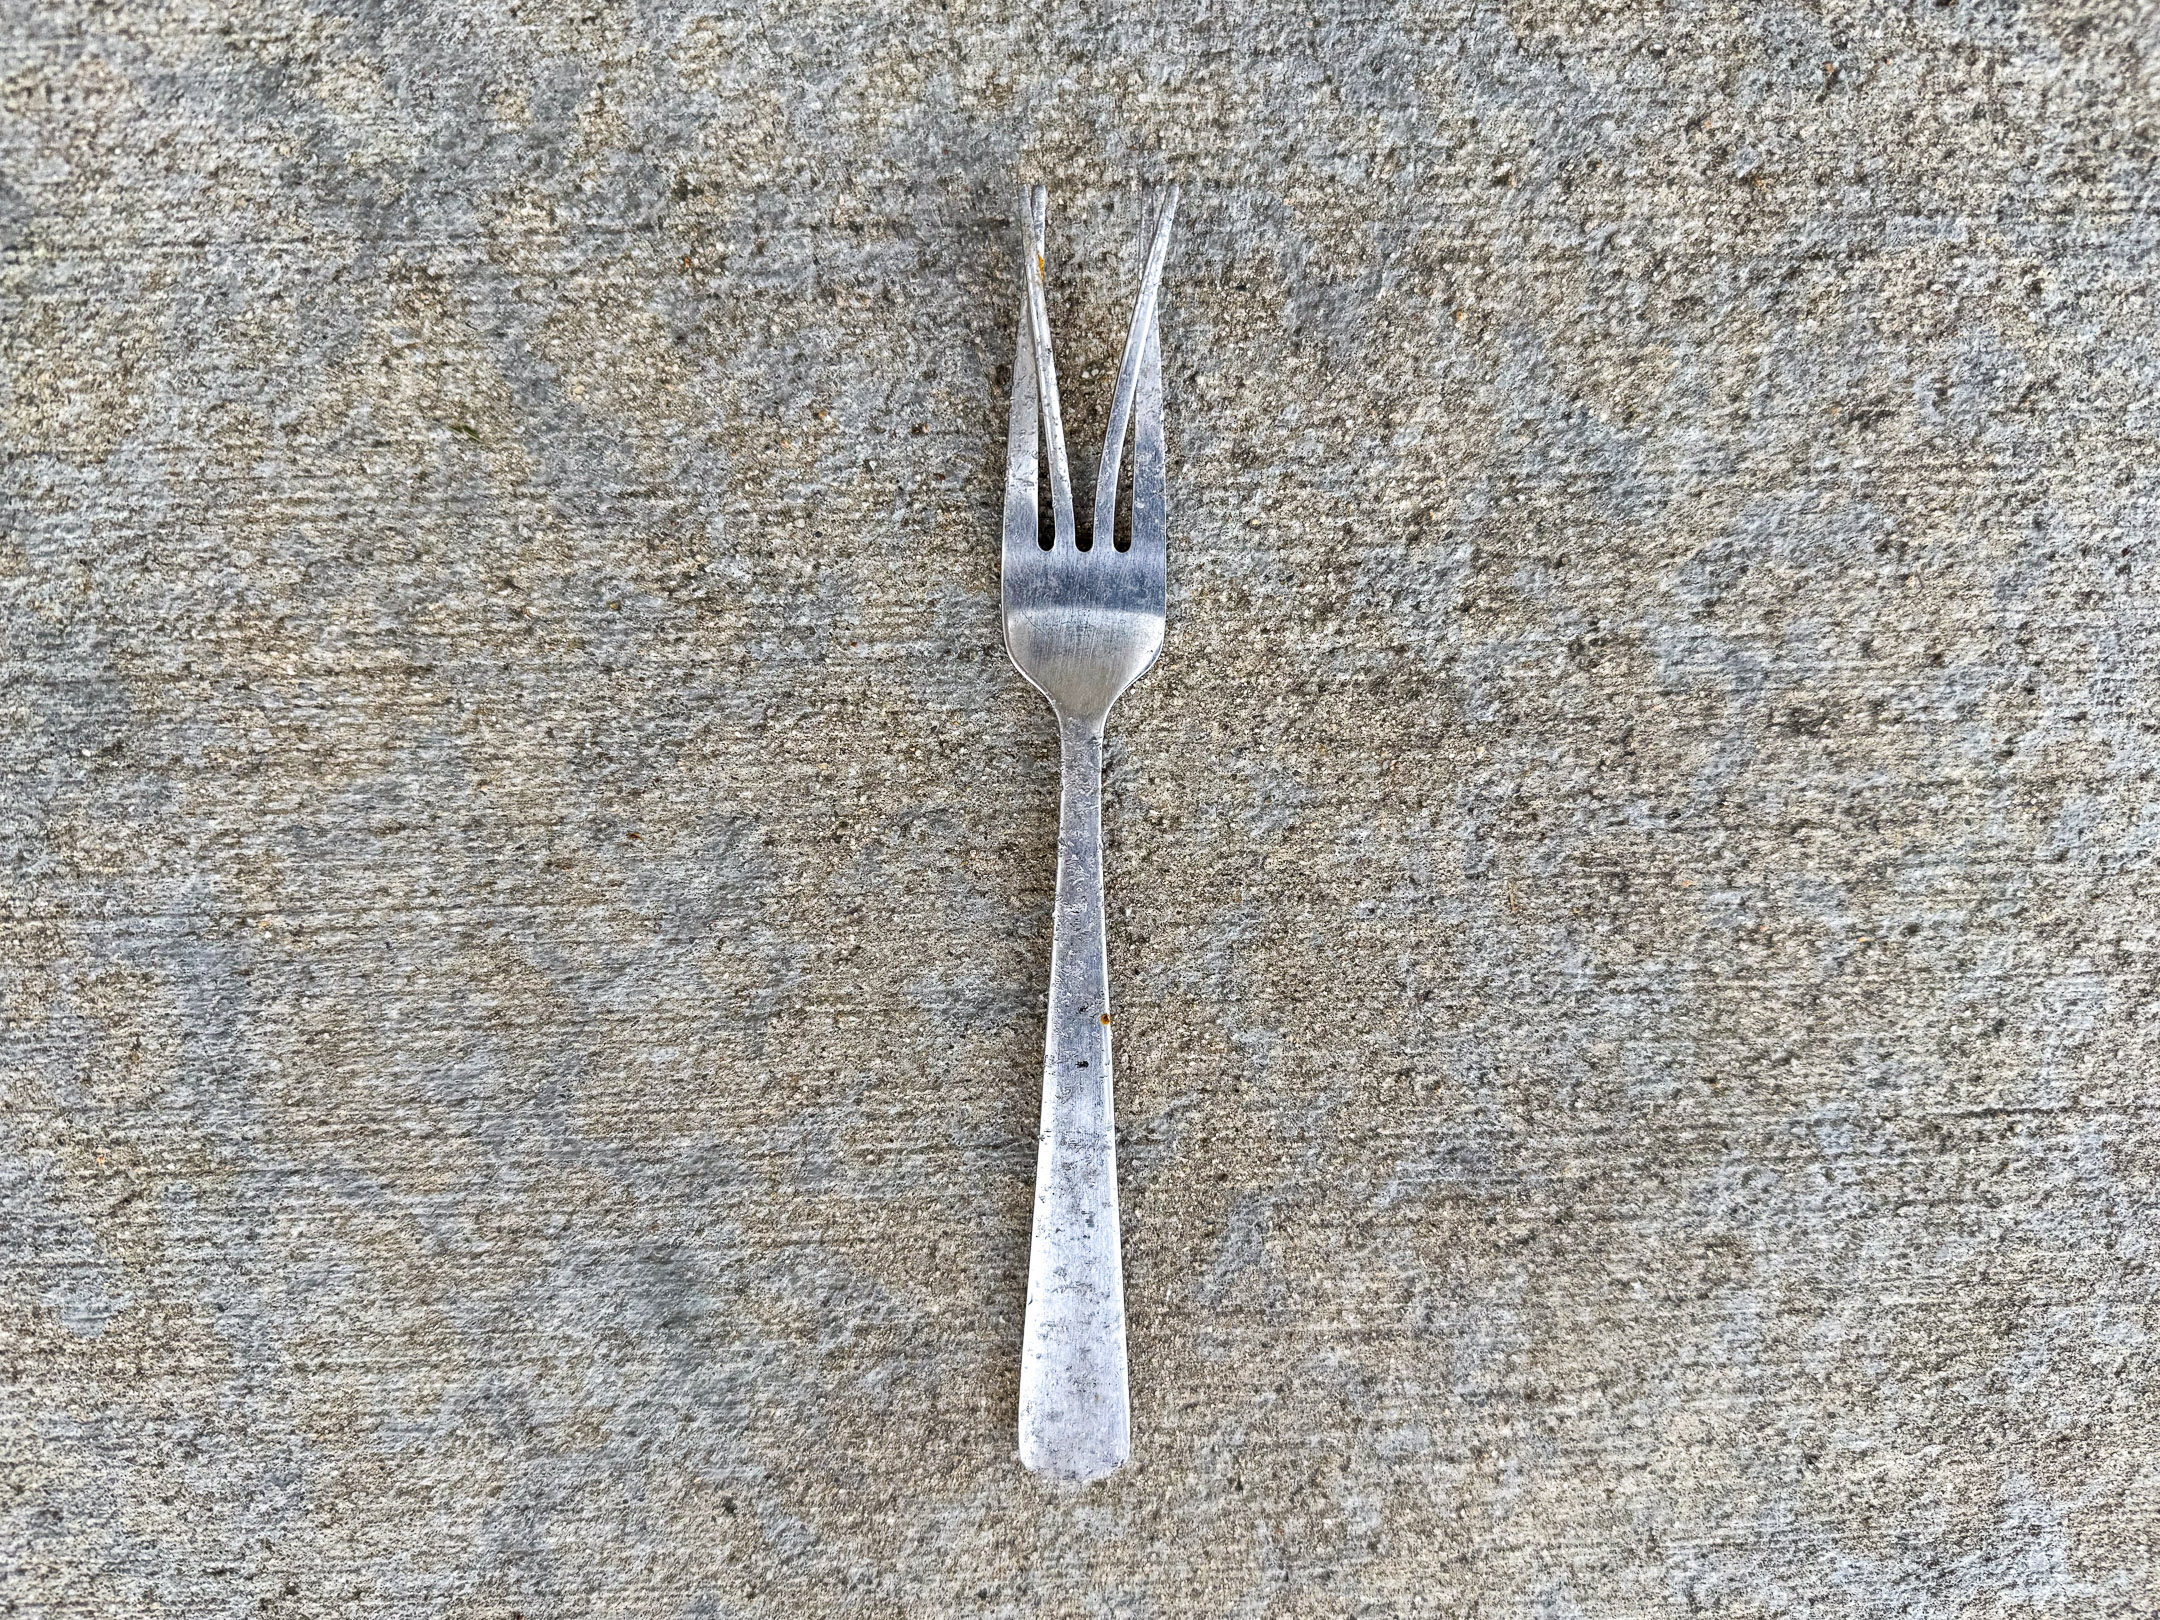 Weathered four-tined fork with the middle two tines bent outward